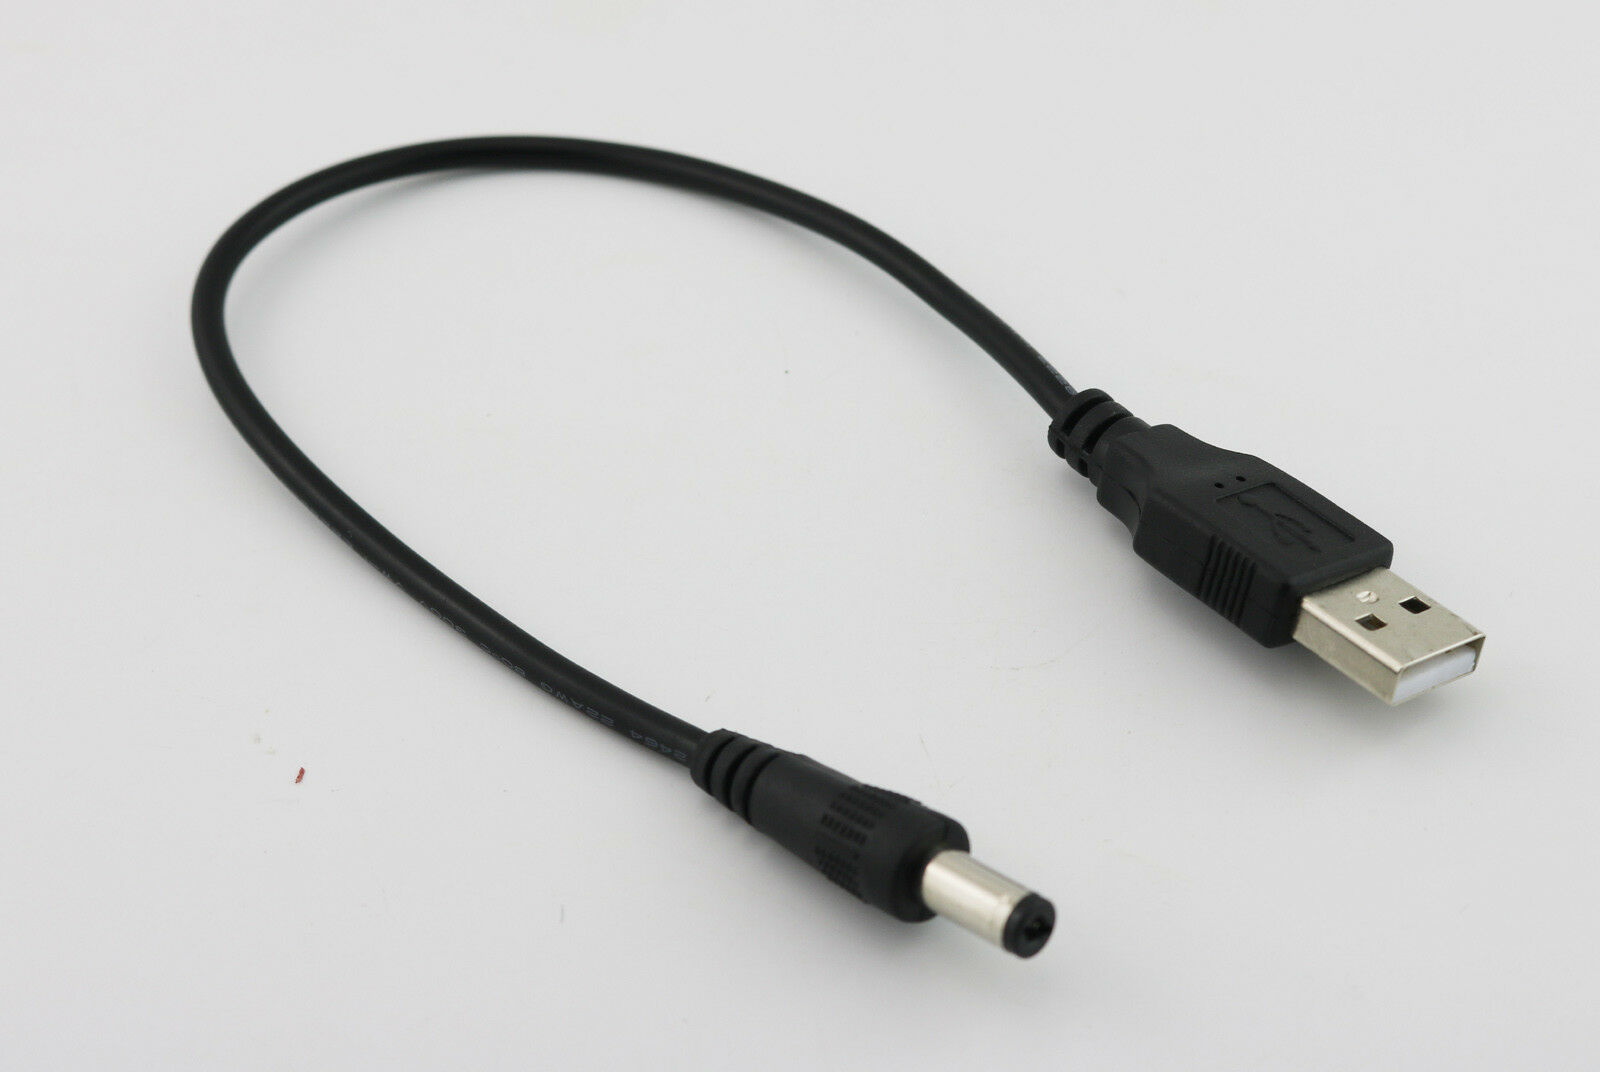 USB Male to 5.5mm x 2.1mm Male 5 Volt DC Power Barrel Jack Power Cable Cord 25cm Type: DC Power Connector To Fit: Ana